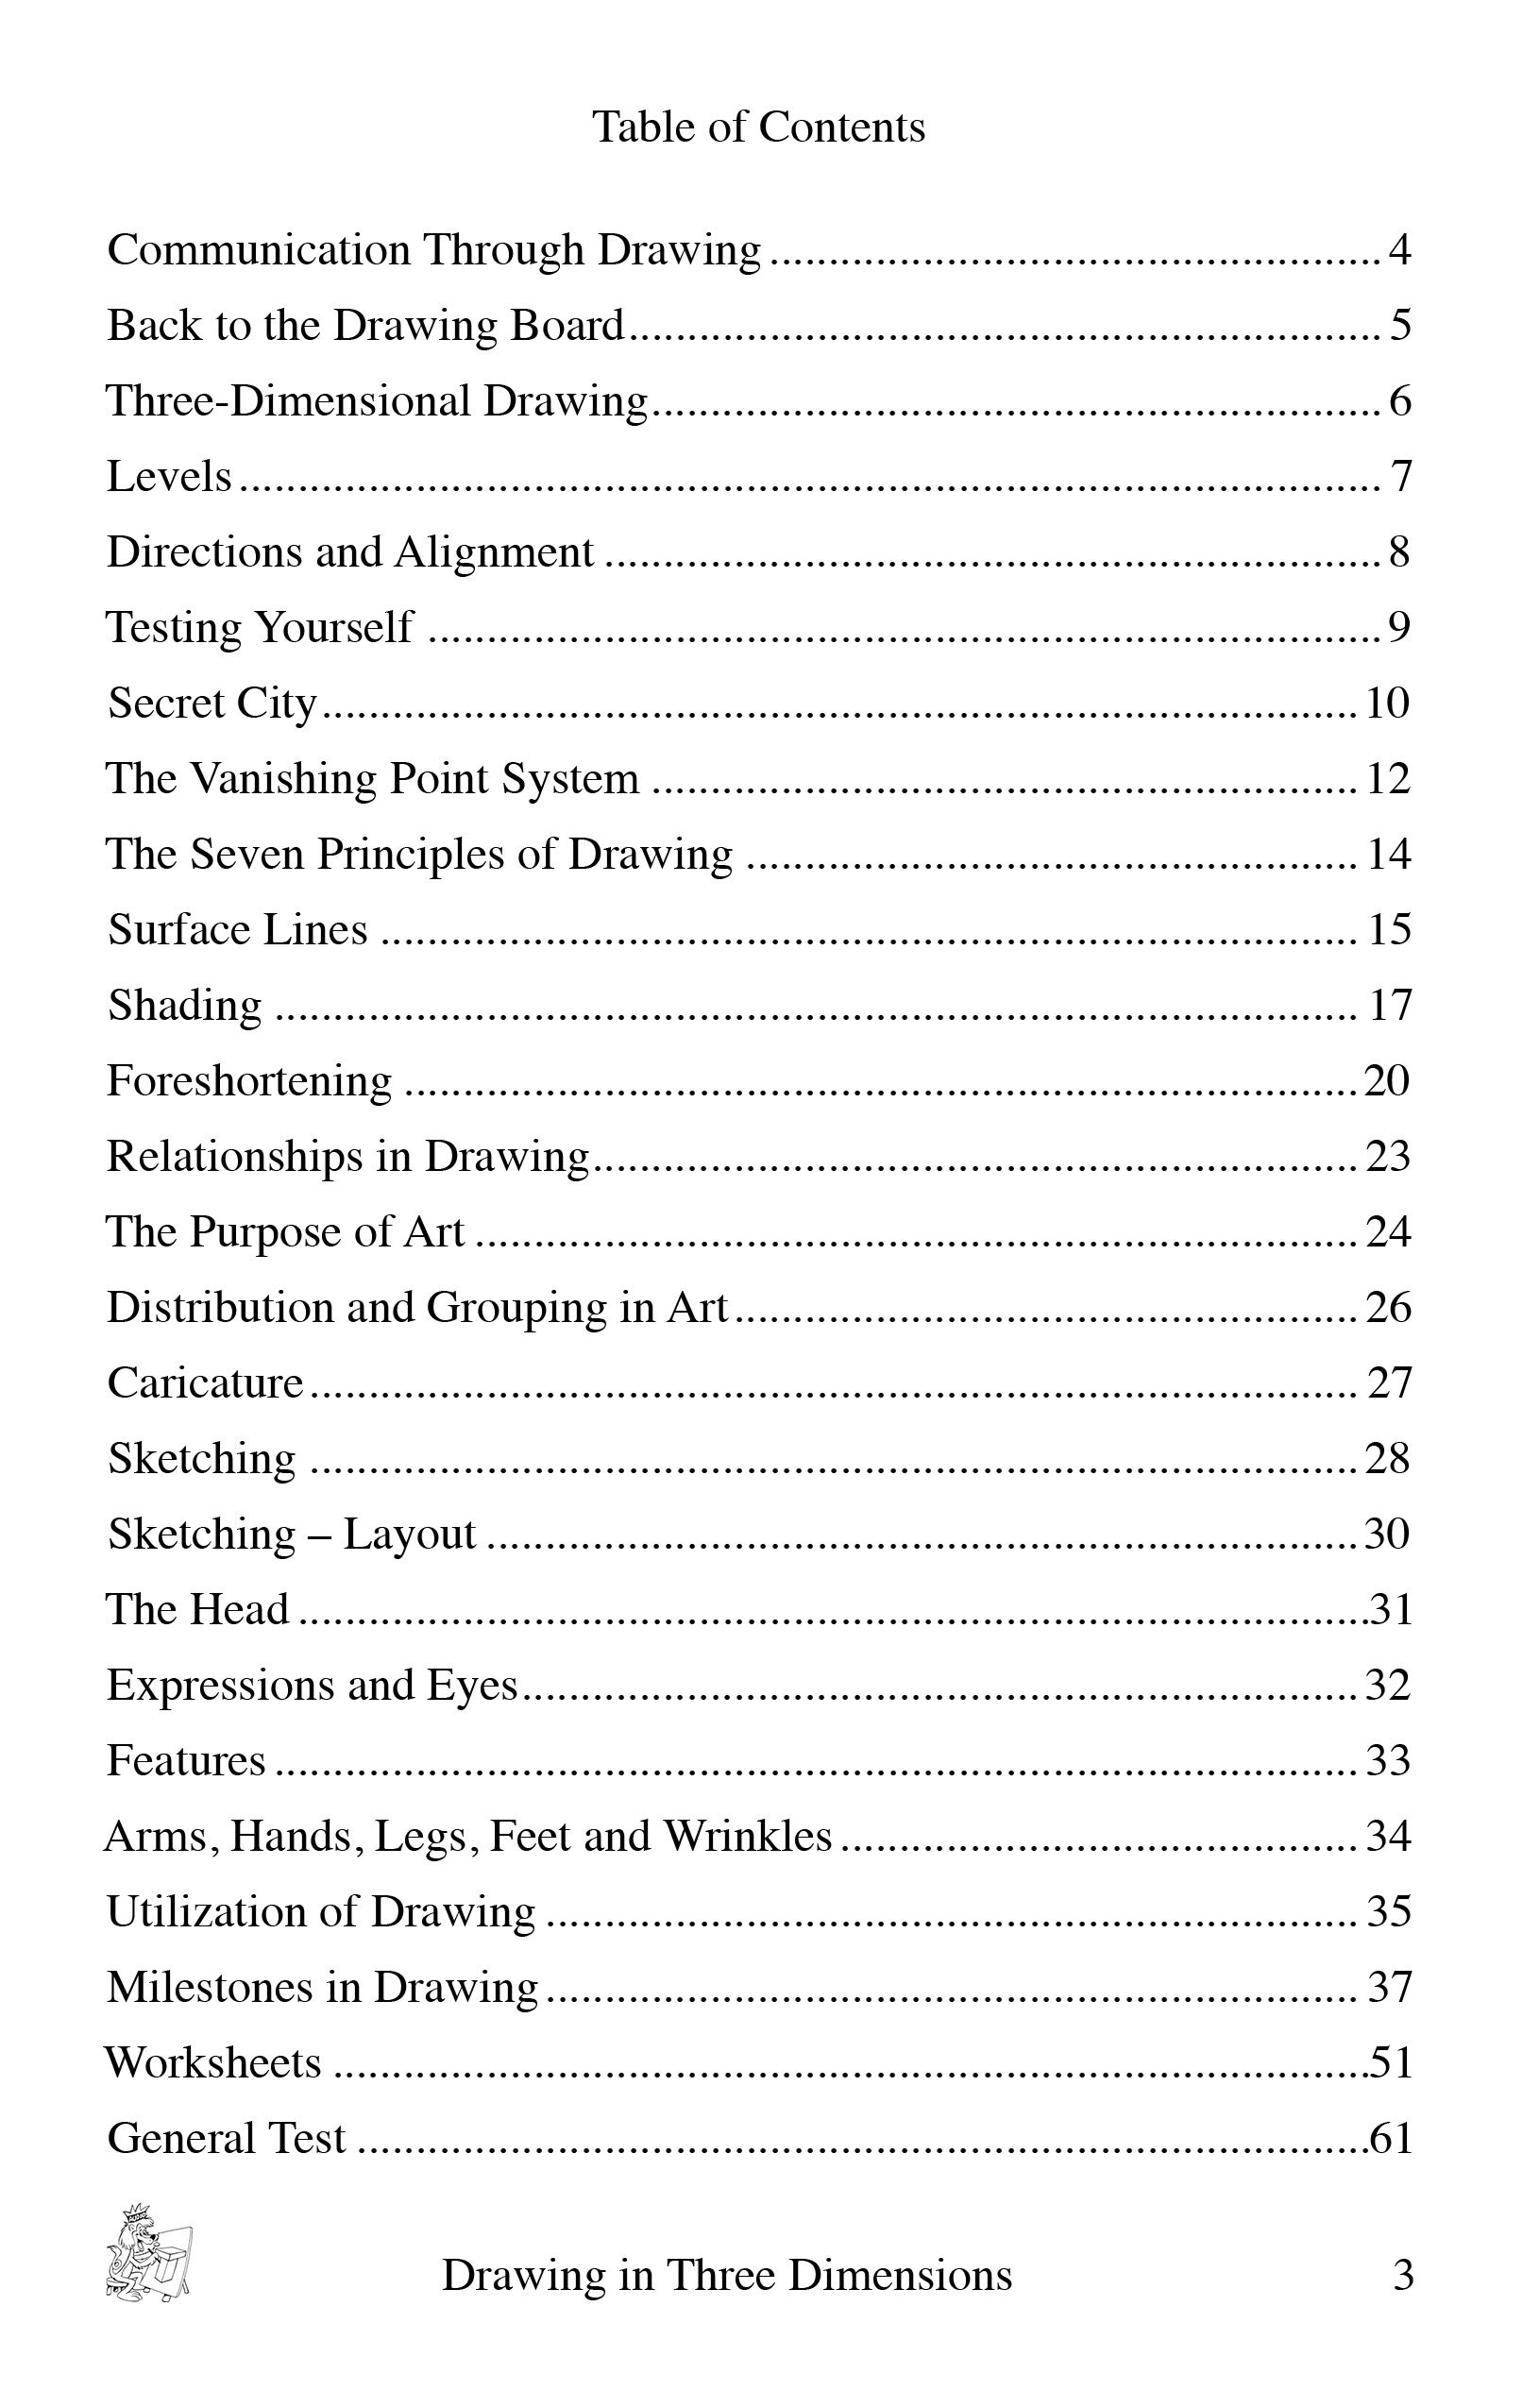 Table of contents from the book Drawing in Three Dimensions by Bruce McIntyre